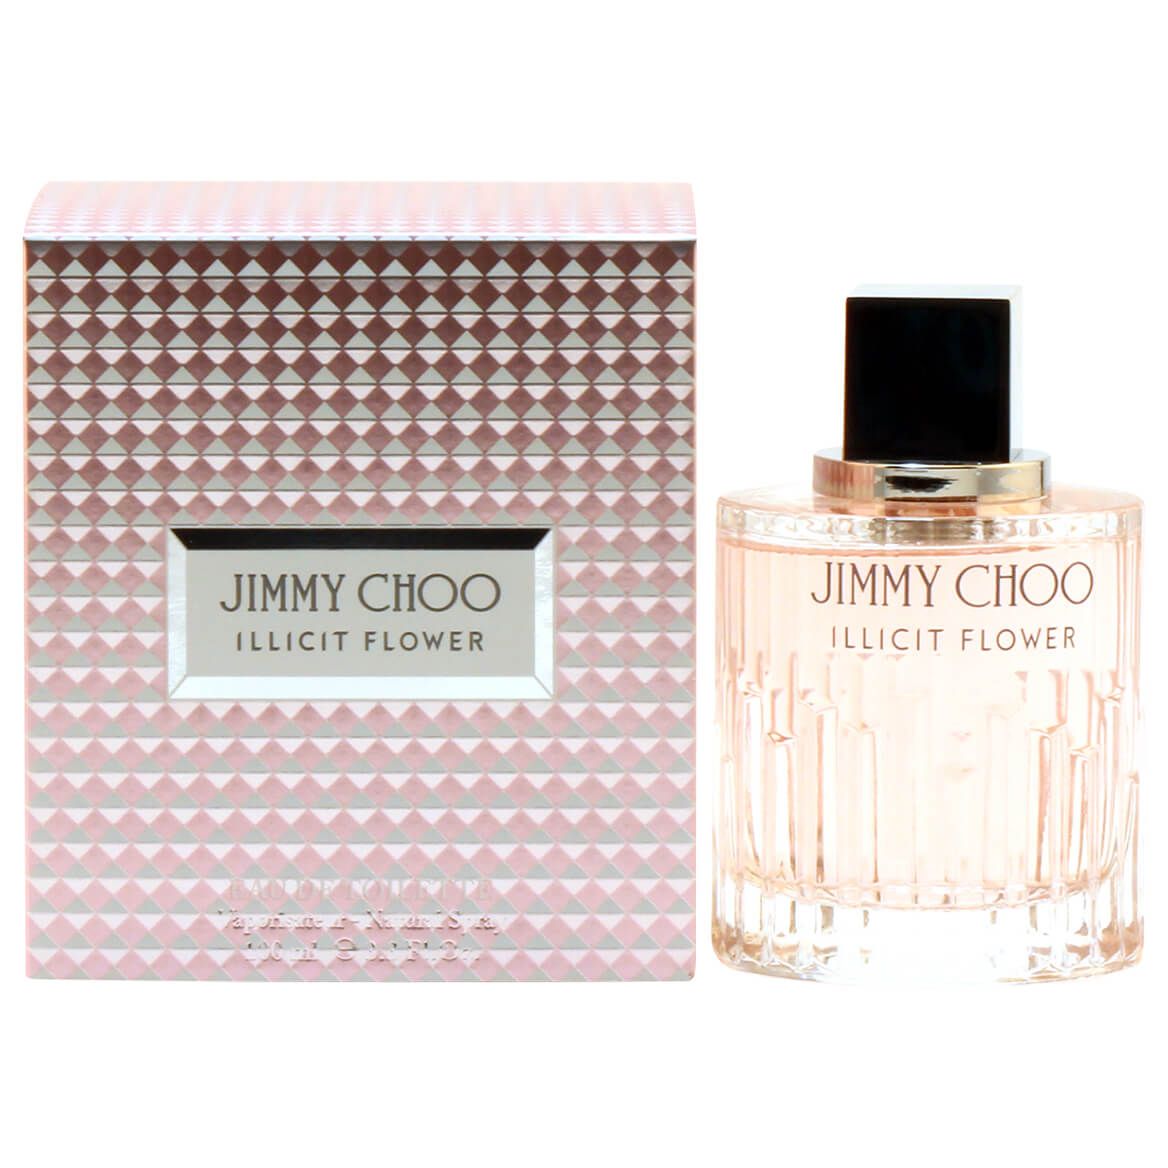 Illicit Flower by Jimmy Choo for Women EDT, 3.3 oz. + '-' + 373094